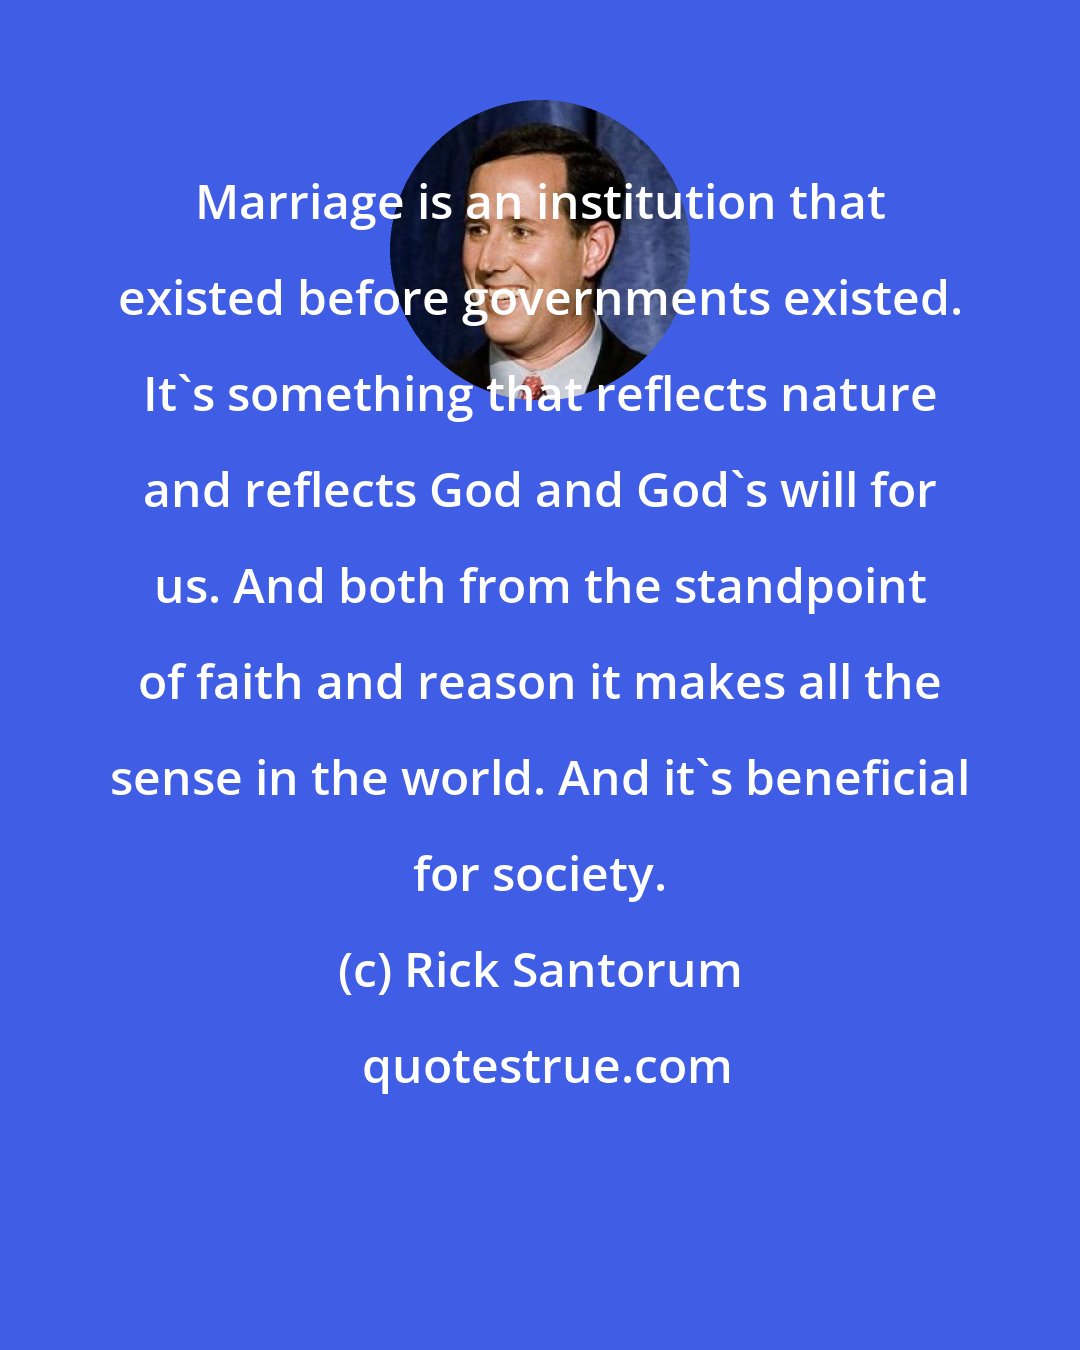 Rick Santorum: Marriage is an institution that existed before governments existed. It's something that reflects nature and reflects God and God's will for us. And both from the standpoint of faith and reason it makes all the sense in the world. And it's beneficial for society.